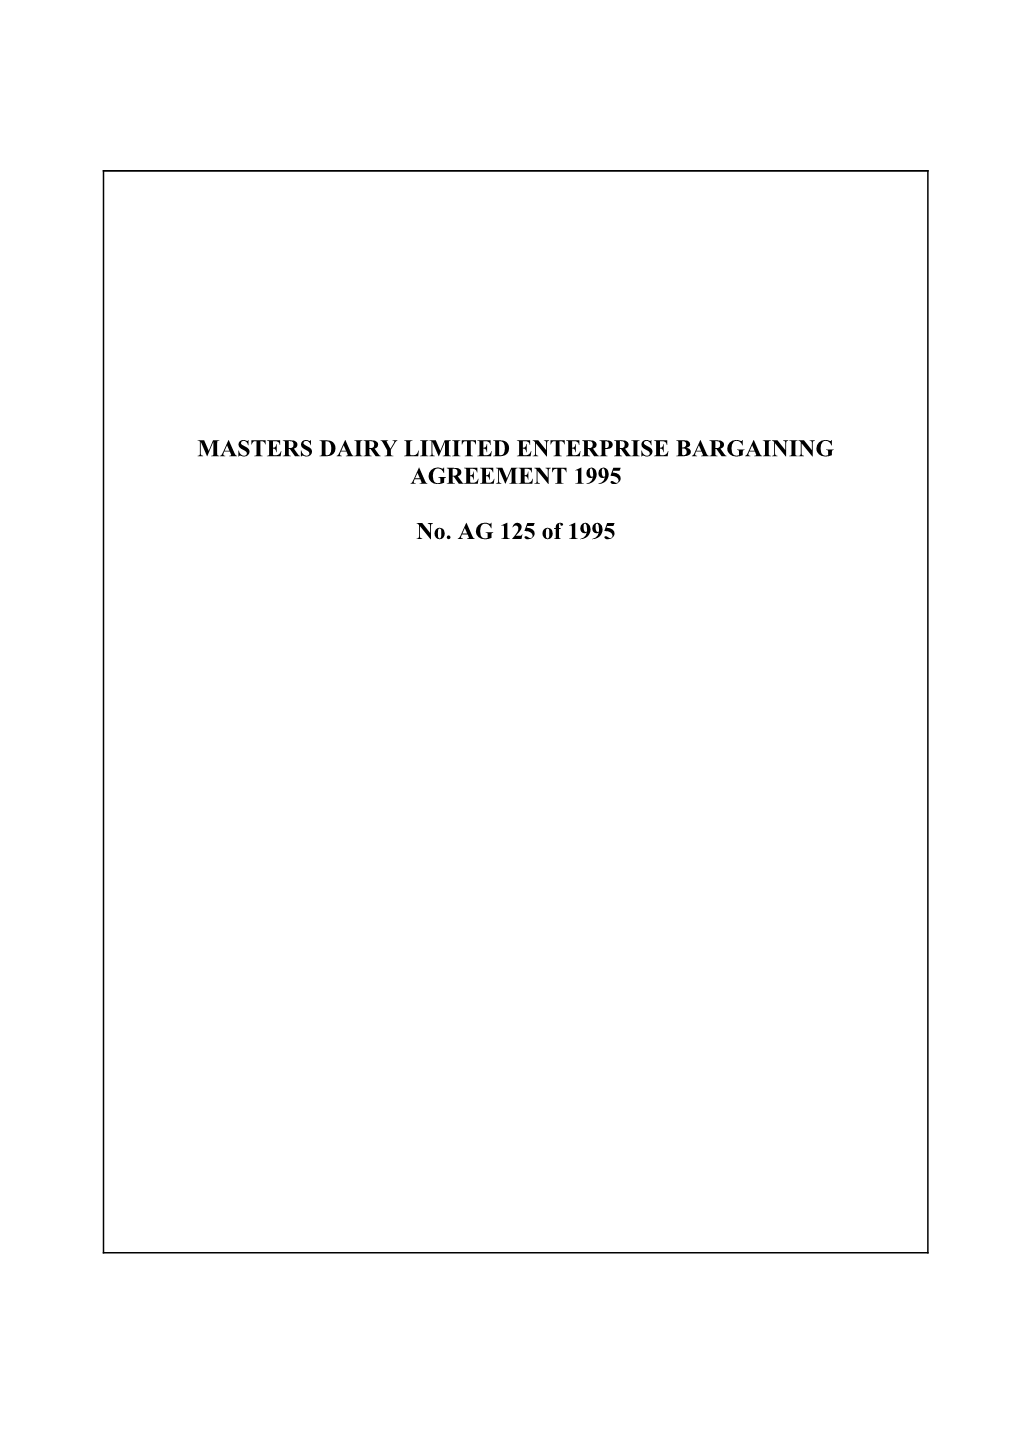 Masters Dairy Limited Enterprise Bargaining Agreement 1995, No. AG125 of 1995